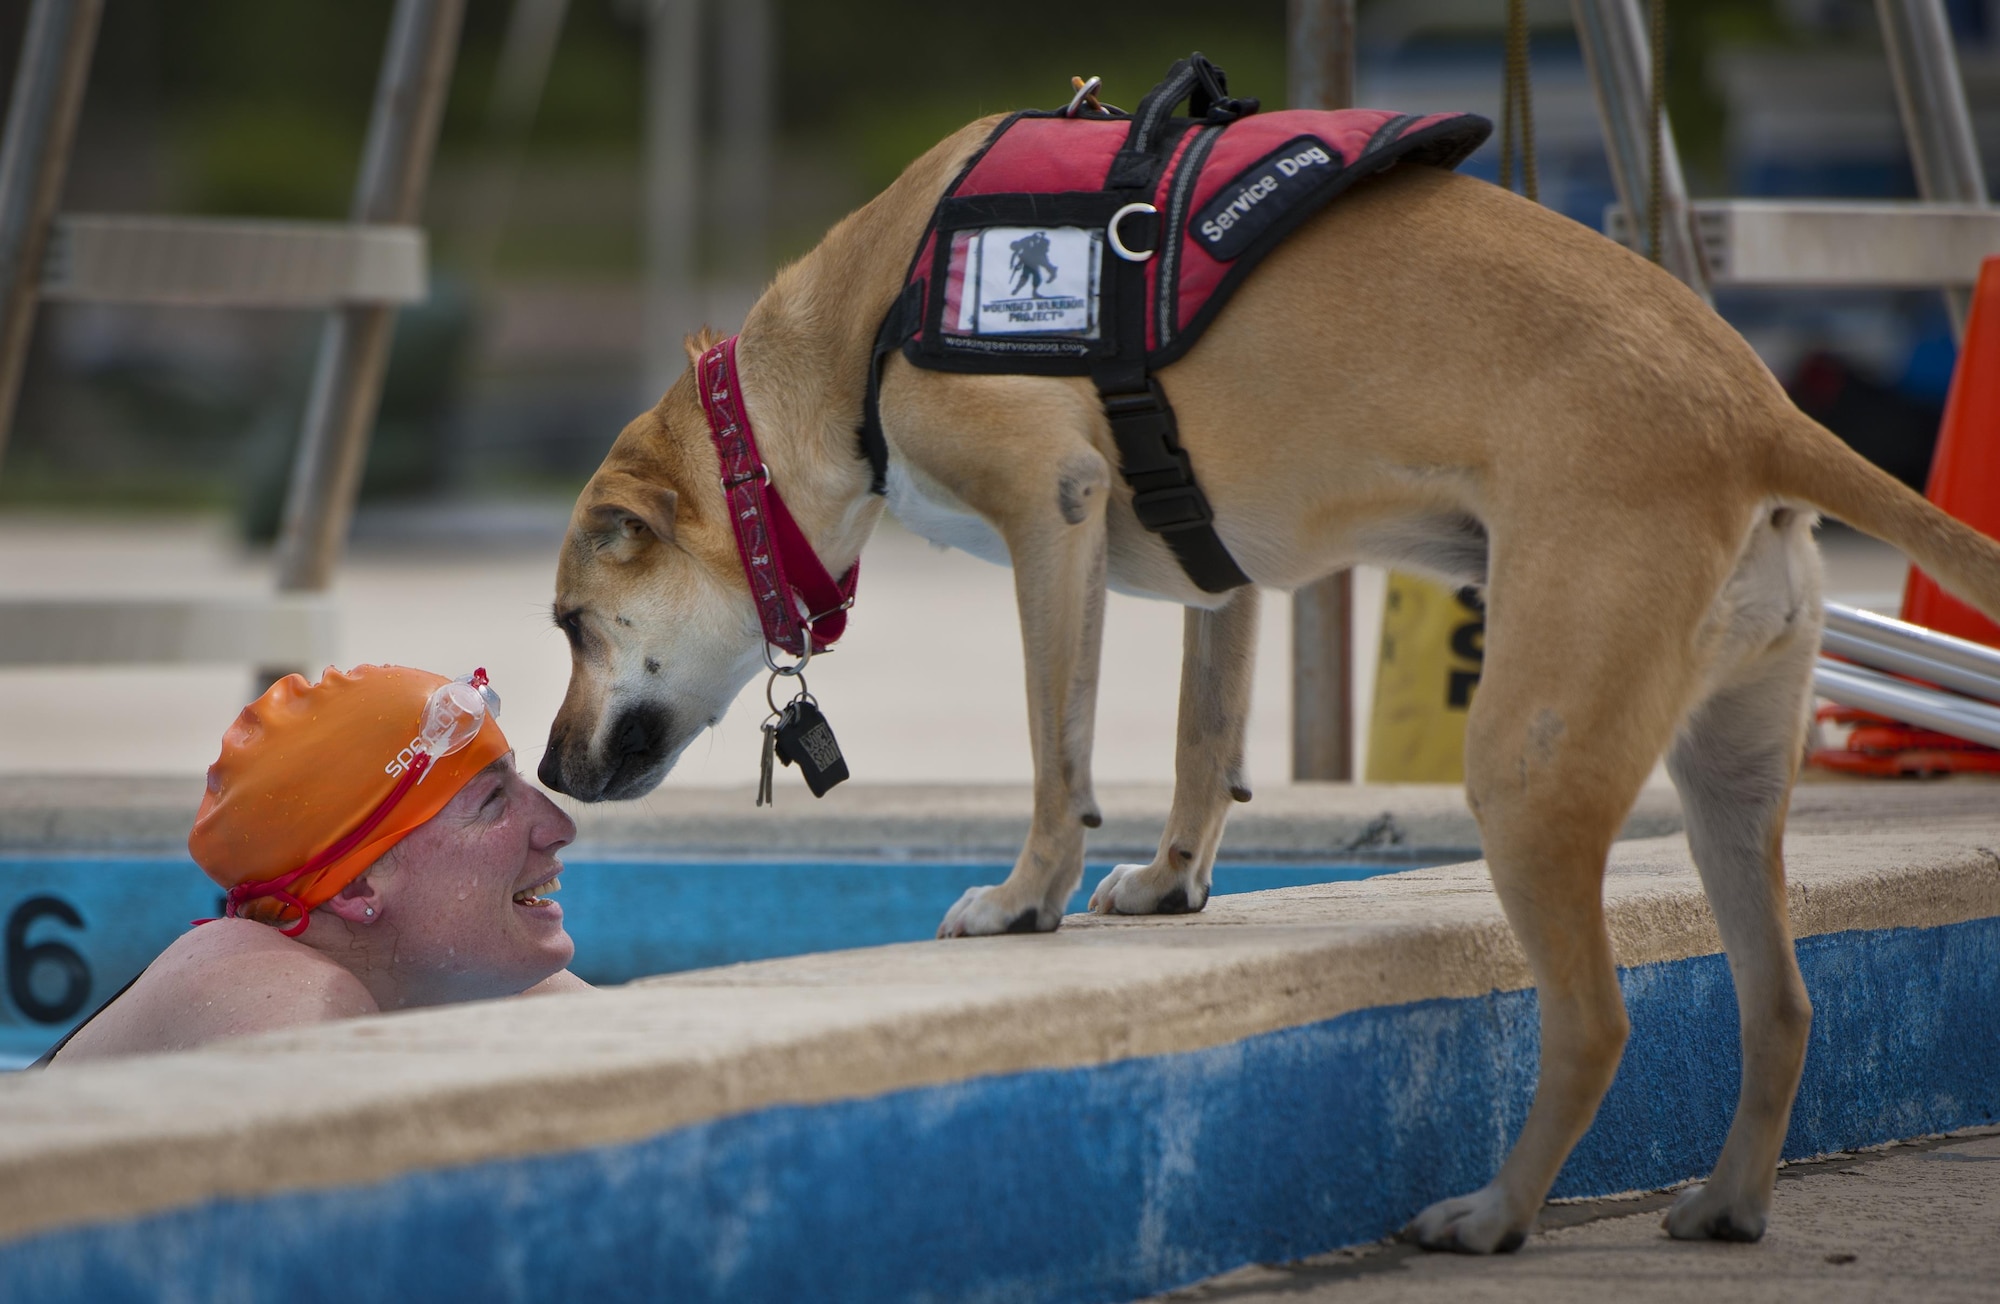 Melissa Gonzales, an Air Force Wounded Warrior athlete, shares a moment with her service dog, Bindi, after swimming laps during the fourth day of an introductory adaptive sports and rehabilitation camp at Eglin Air Force Base, Fla., April 16, 2015. The Department of Defense’s military adaptive sports program enhances warrior recovery by engaging wounded, ill and injured service members in ongoing, daily adaptive activities, based on their interest and ability. (U.S. Air Force photo/Samuel King Jr.)